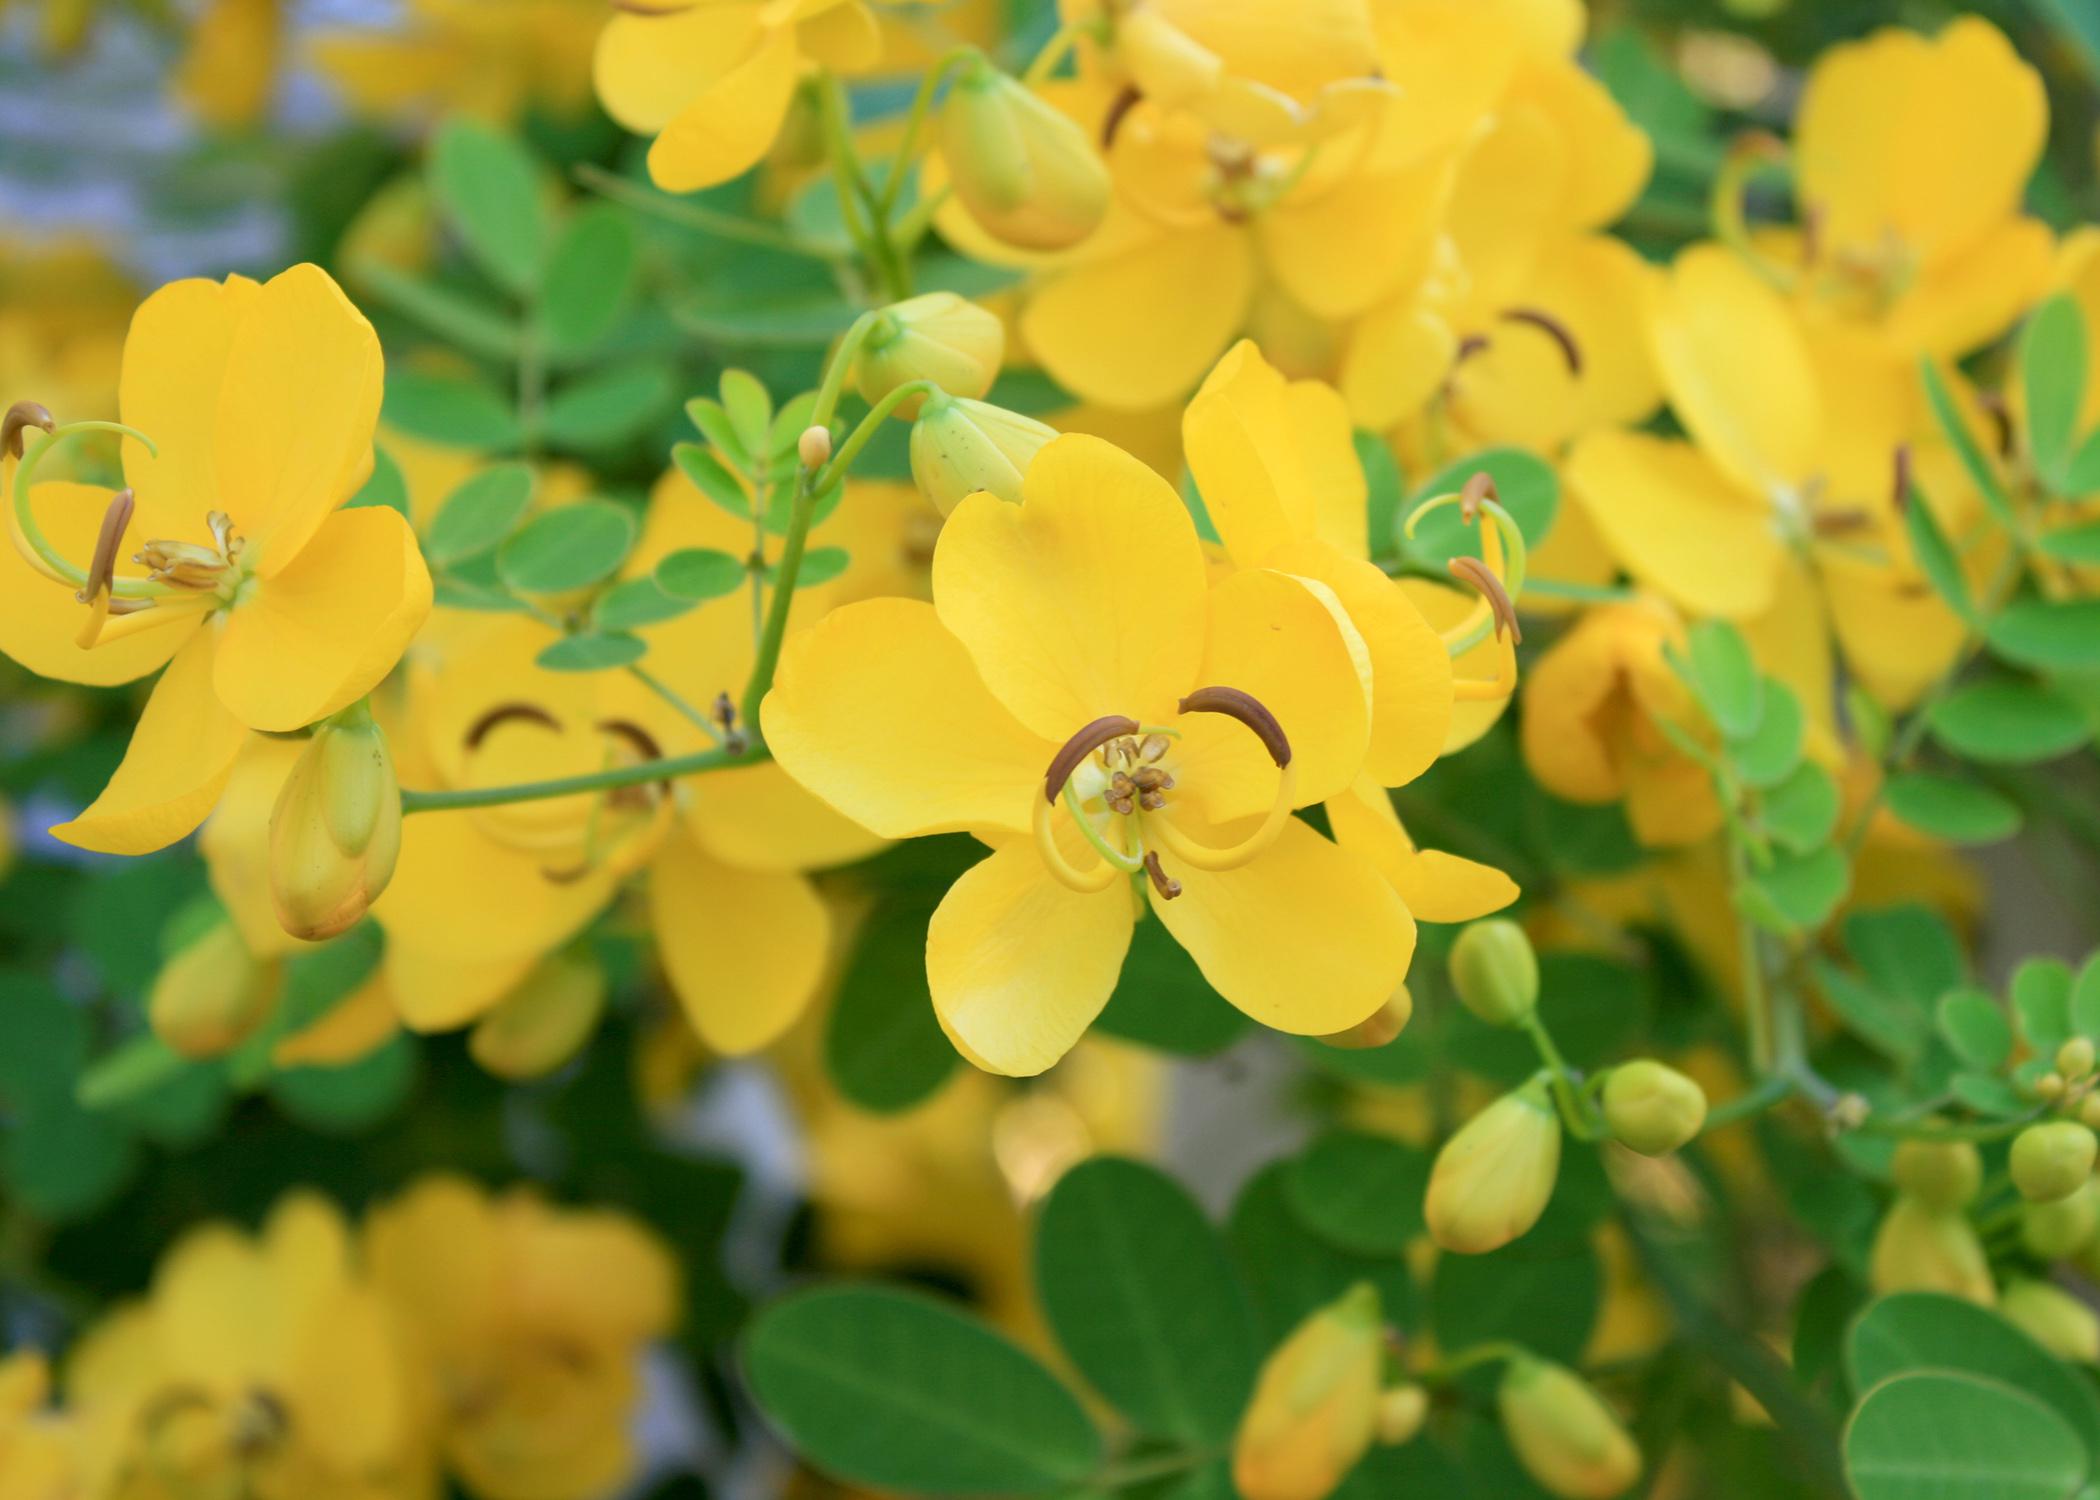 Each spike-like cluster of winter cassia's golden yellow flowers has up to 12 individual blossoms. Flowers have five petals, and the curved shapes of the stamens and pistils add landscape interest. (Photo by MSU Extension Service/Gary Bachman)